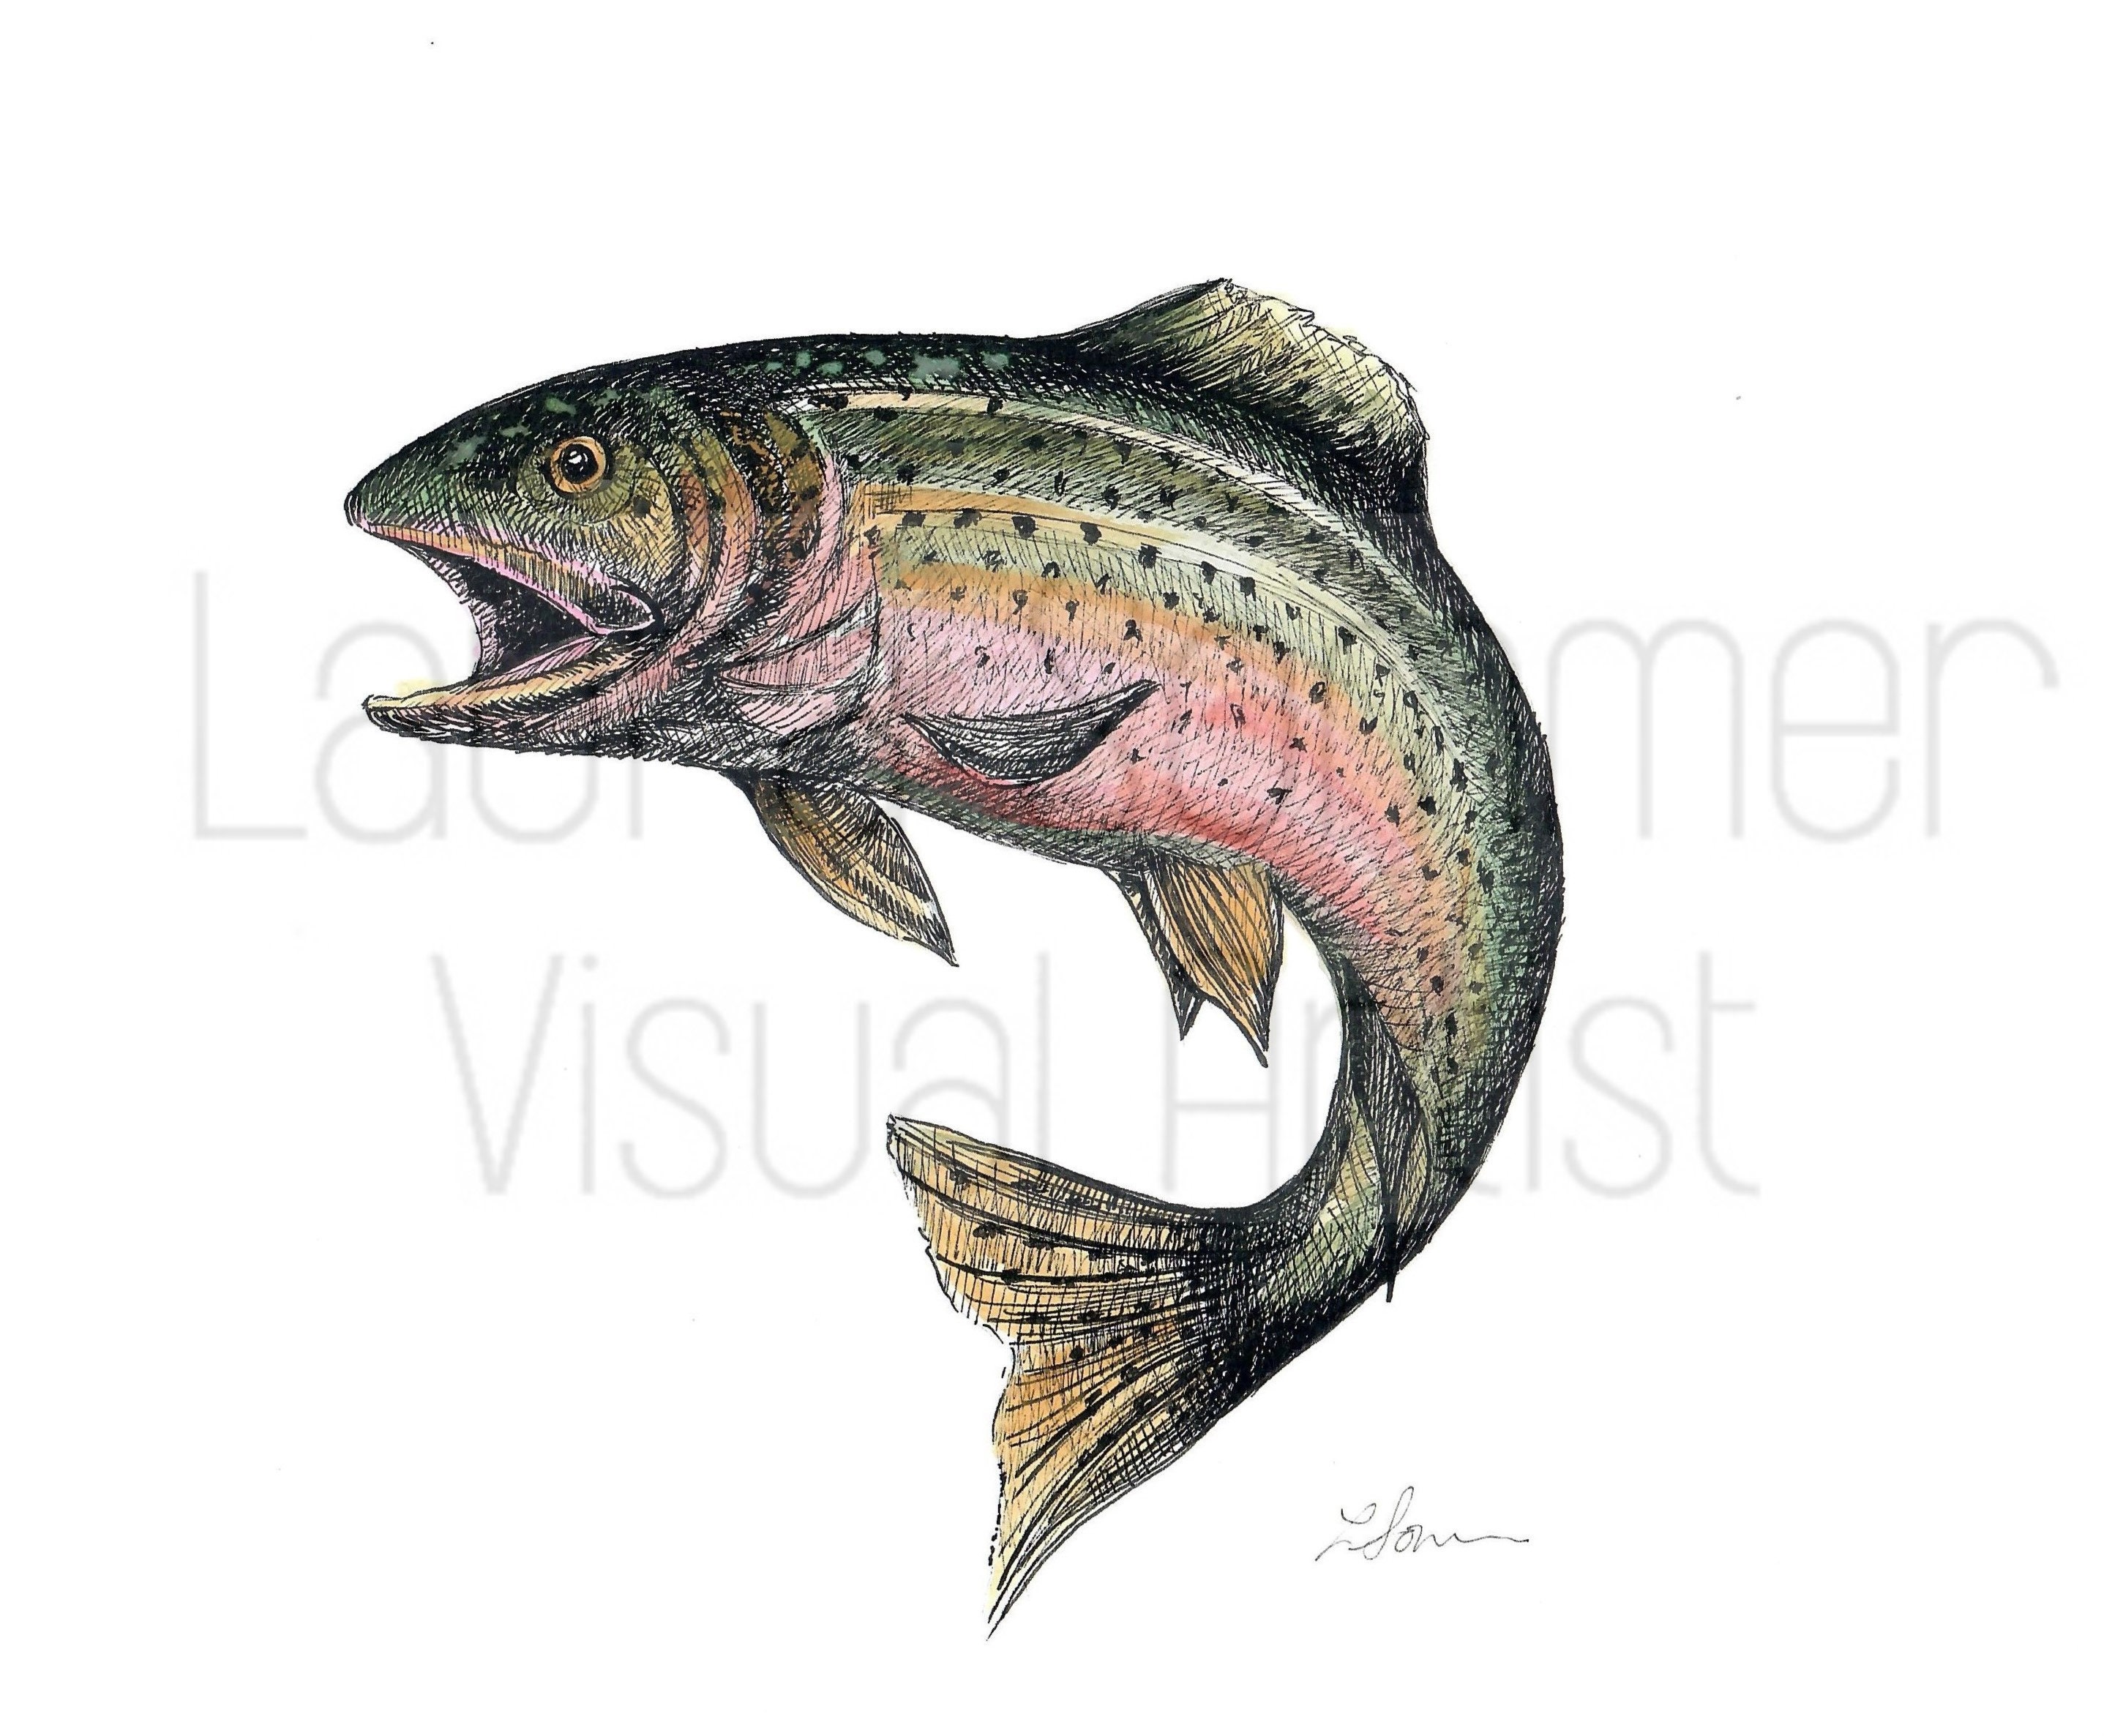 Rainbow Trout Illustration in Water-color and Black Pen Digital